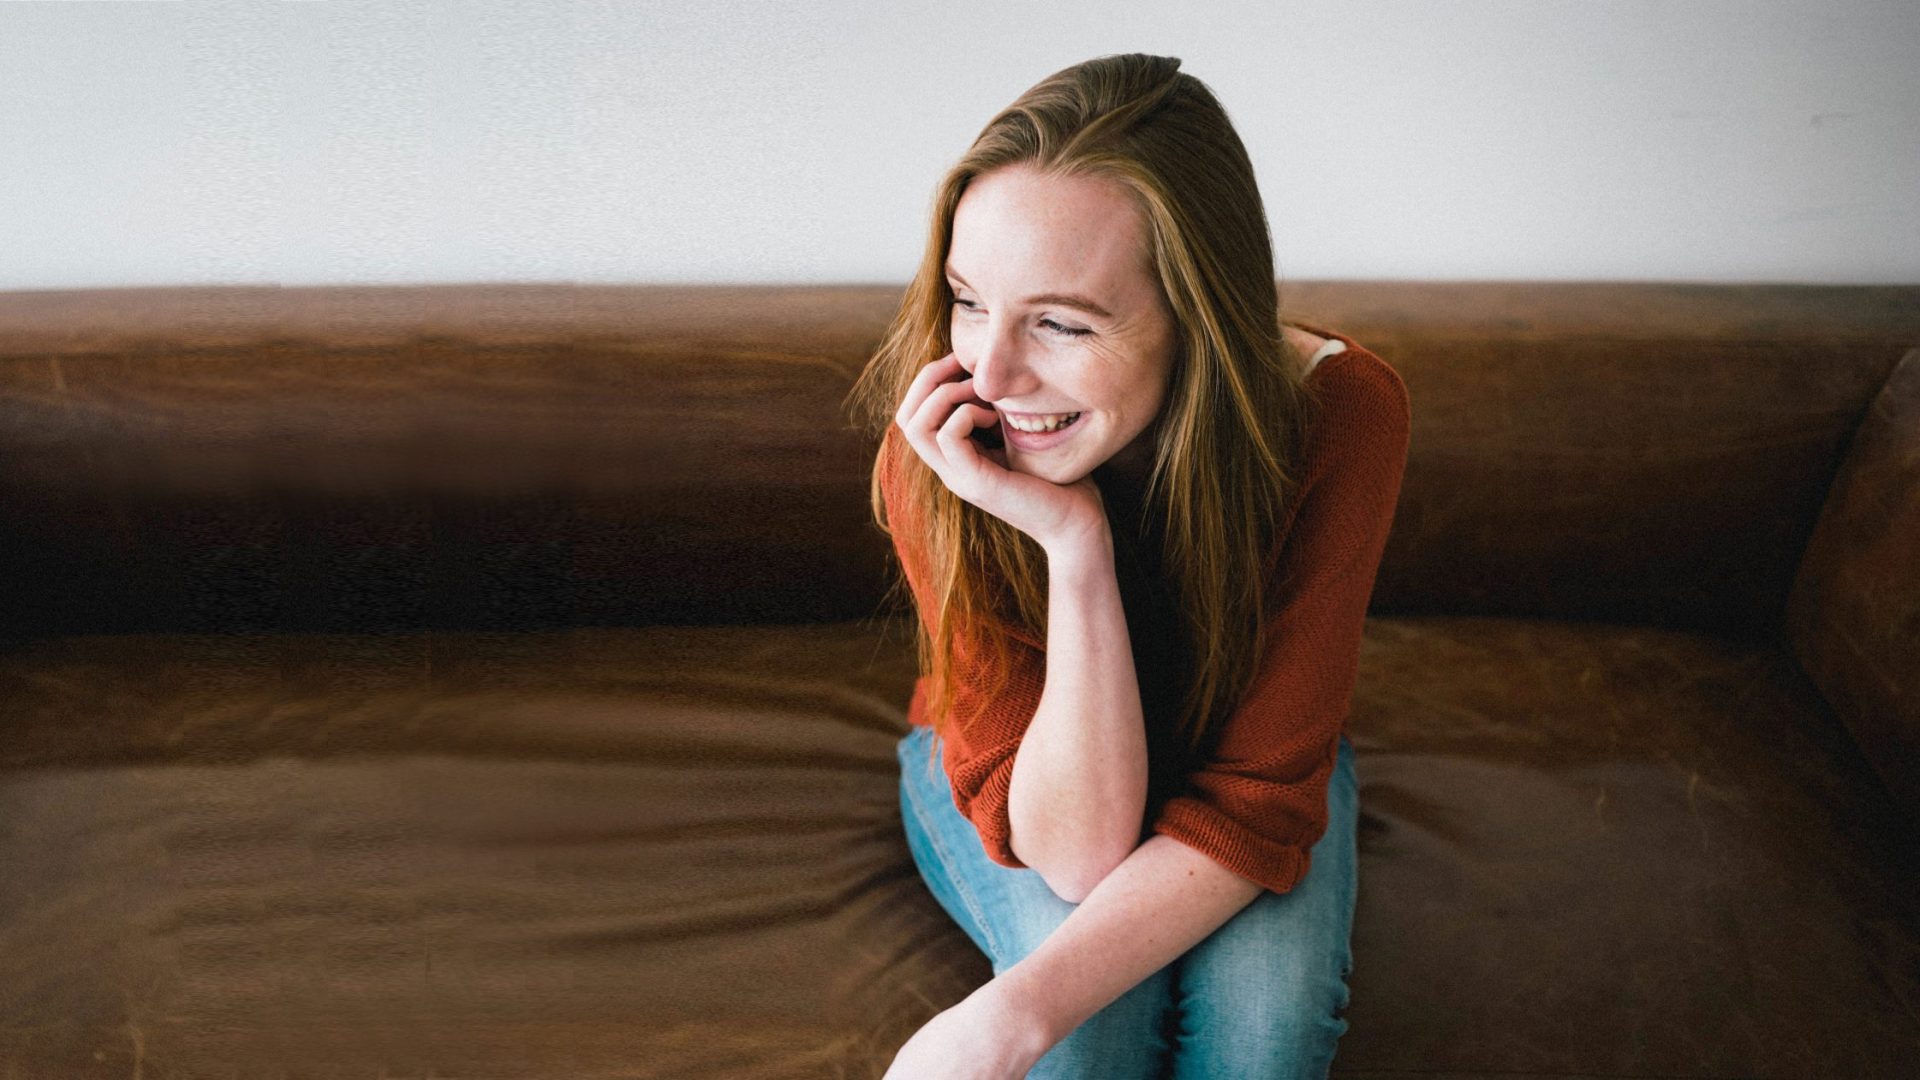 Girl smiling sitting on a sofa